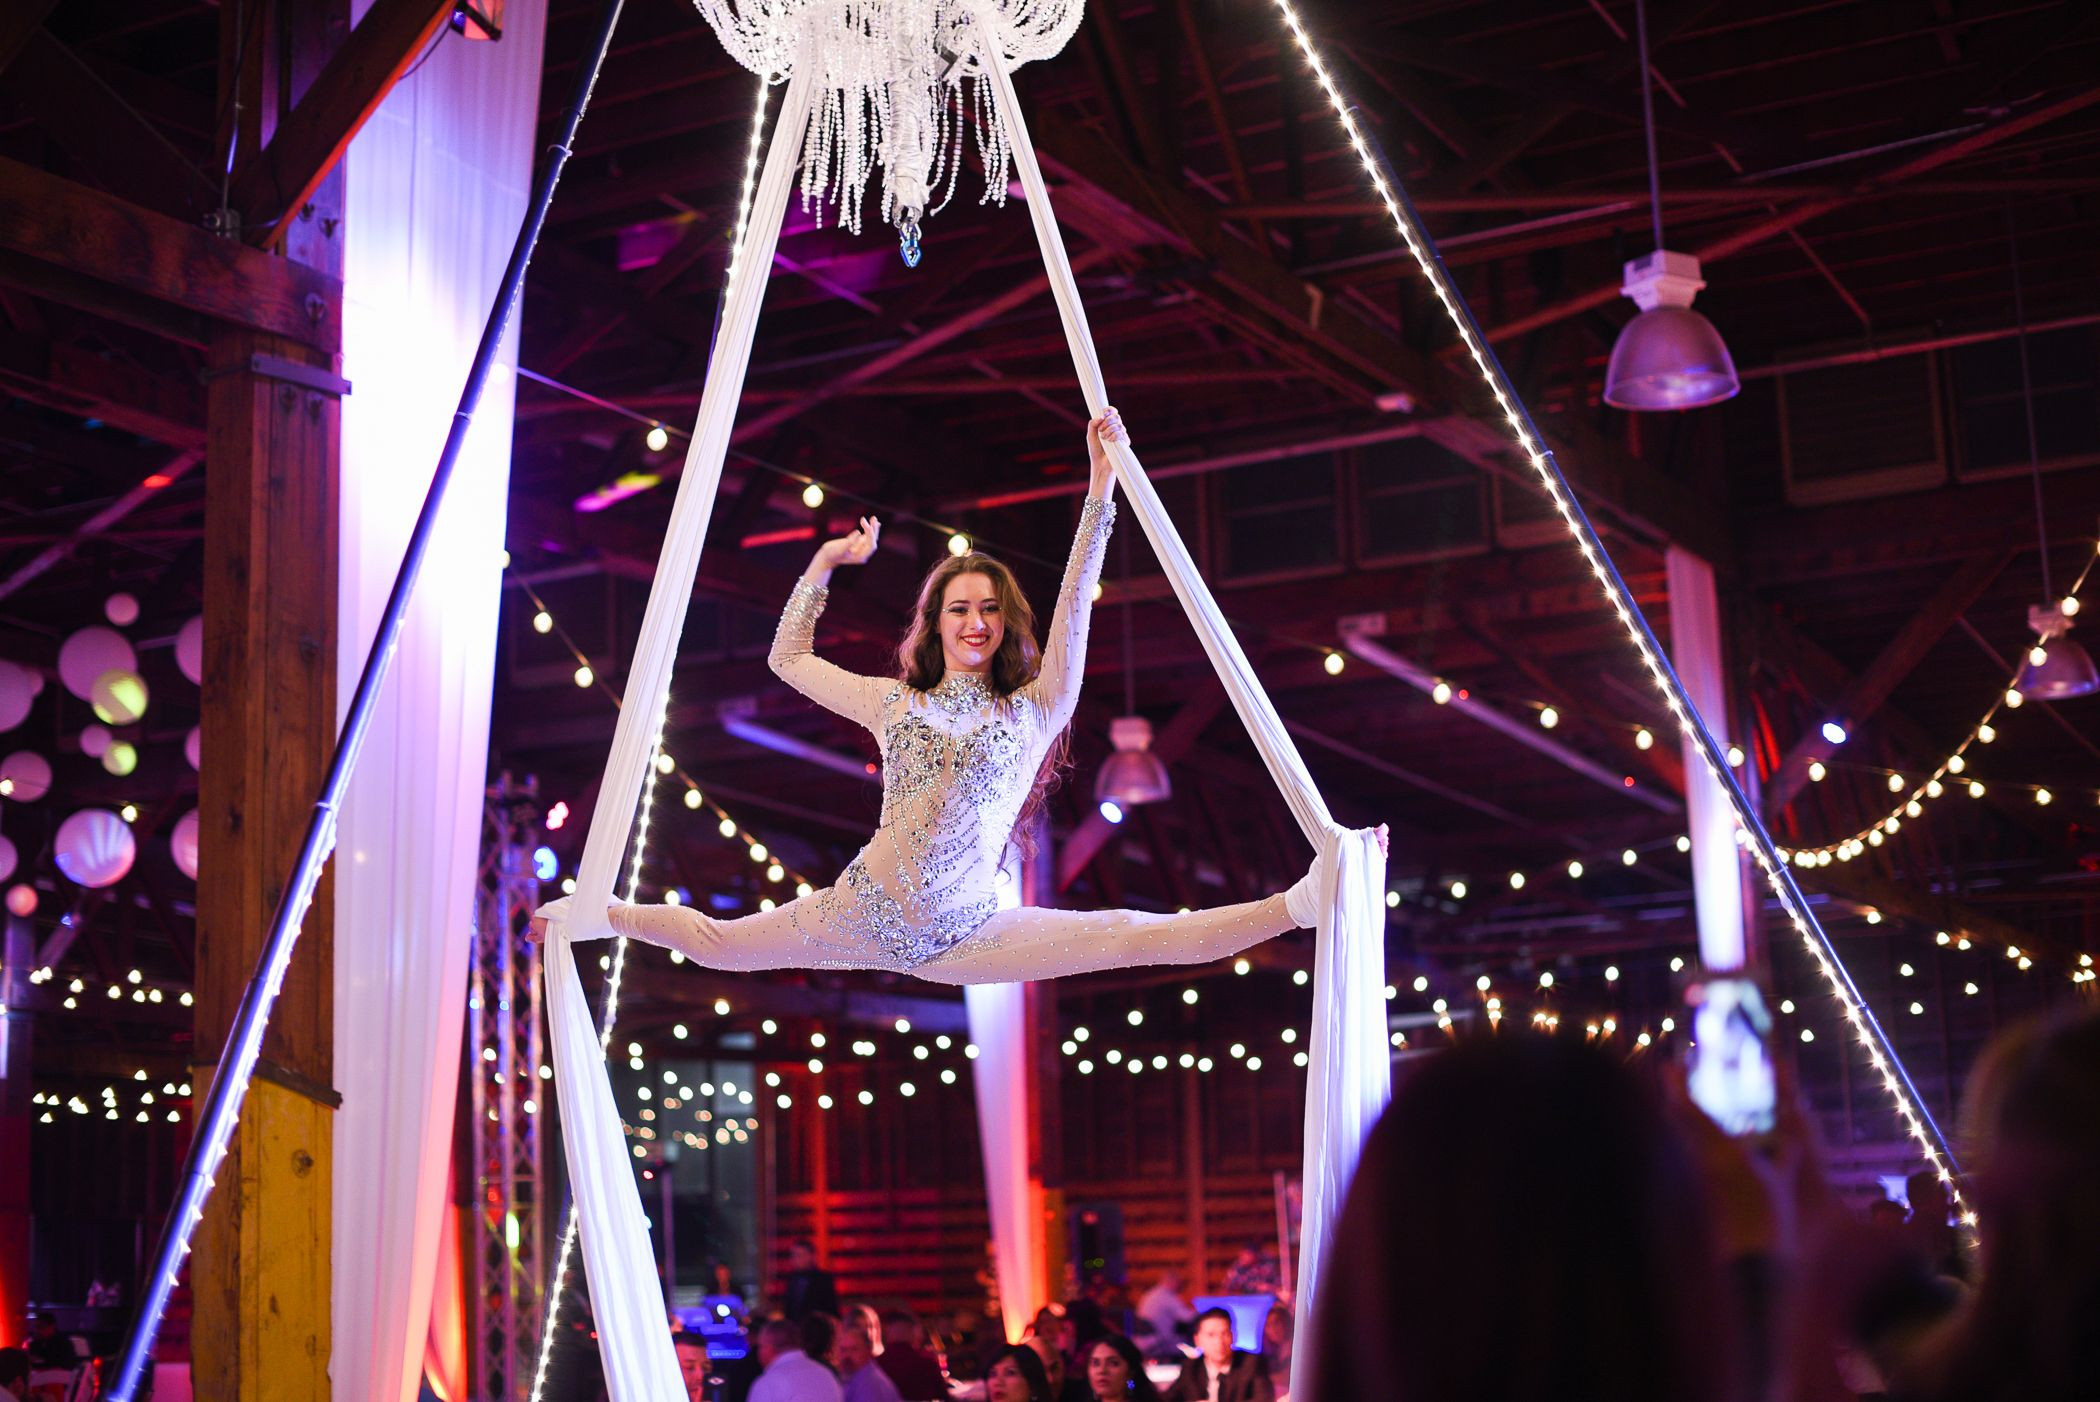 Company Holiday Party Entertainment Ideas
 This pany Christmas party was full of WOW moments